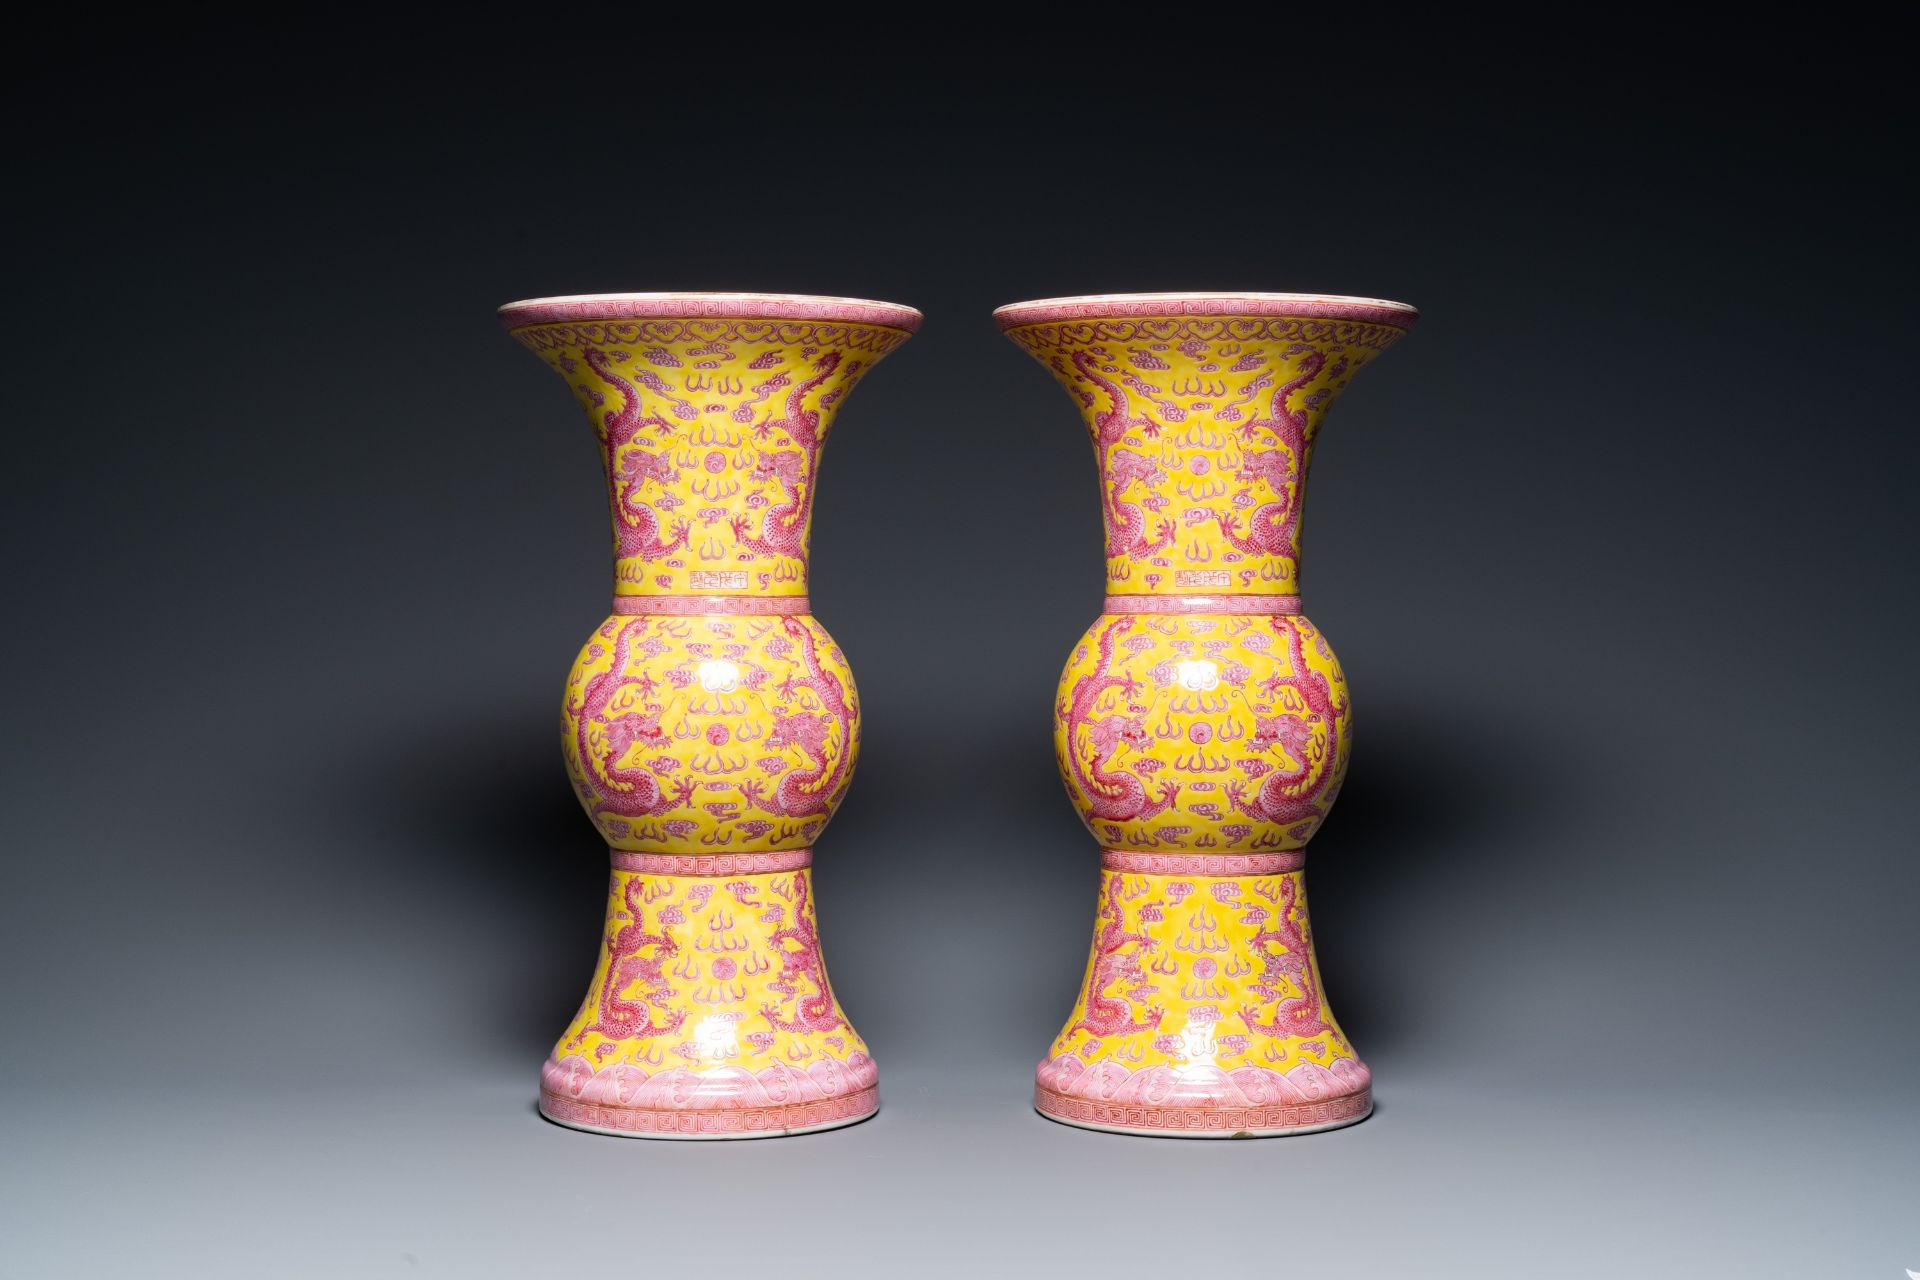 A pair of Chinese puce-enamelled yellow-ground 'gu' vases with dragons, Jia Xu Nian Zhi ____ mark, d